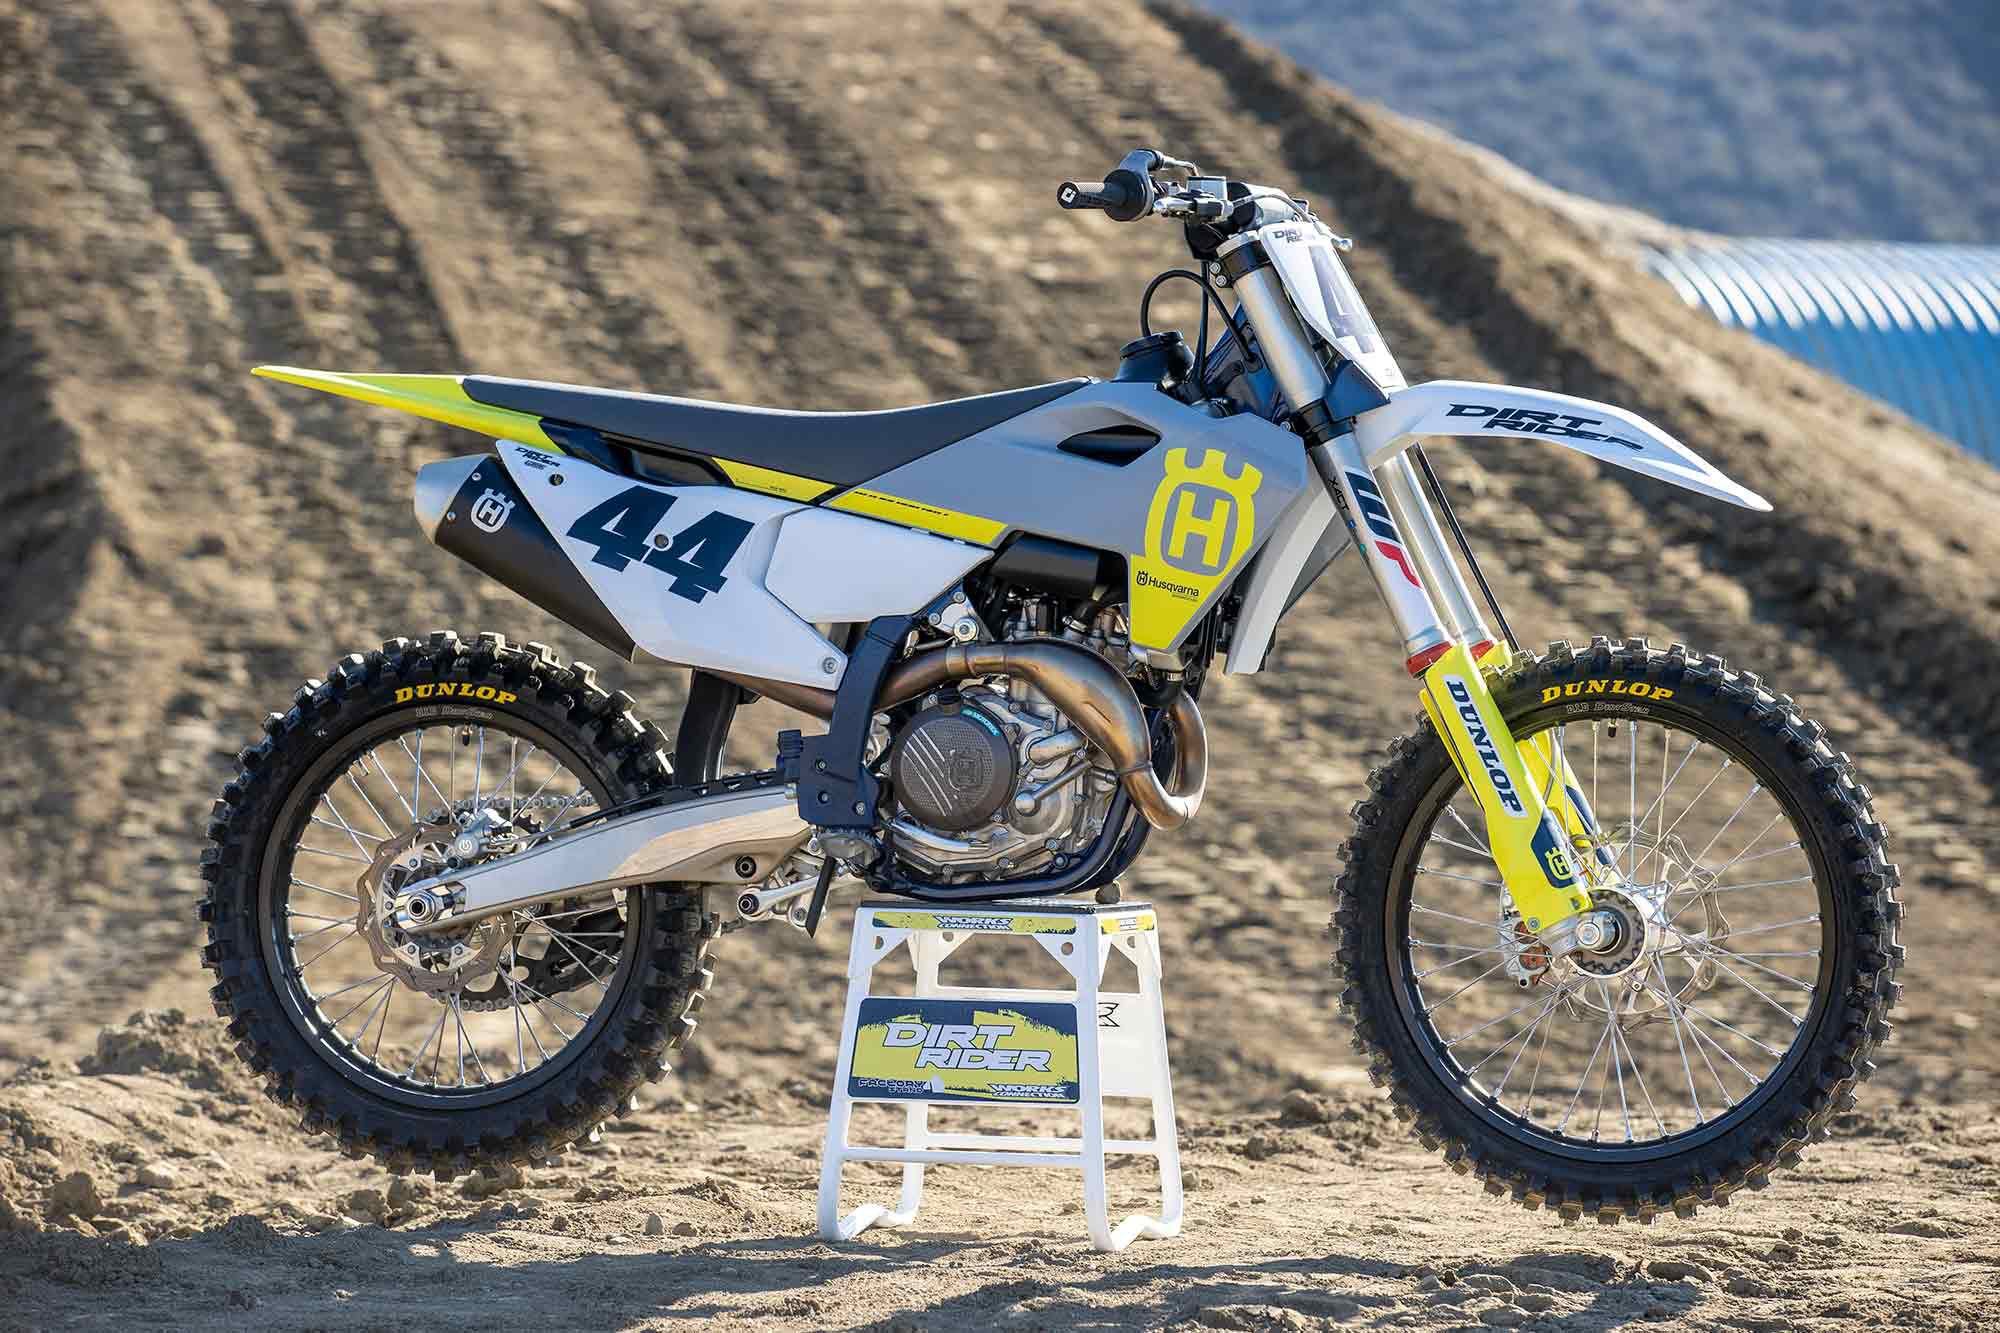 Because Husqvarna specs its flagship motocrosser with a 10mm-lower suspension setup than the KTM 450 SX-F, it has the lowest seat height of all 450 motocross bikes at 36.8 inches.